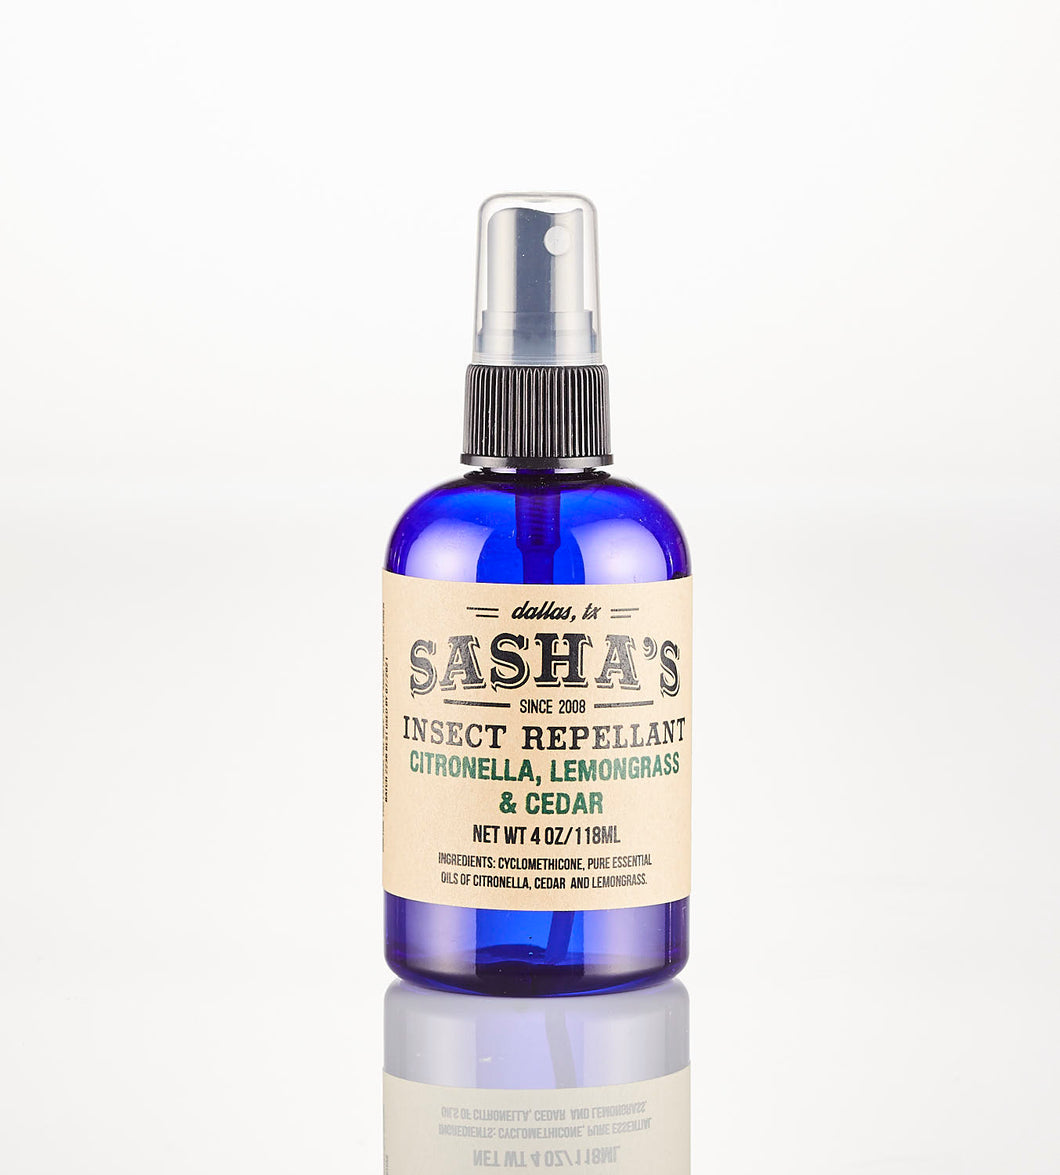 Insect Repel with Pure Essential Oils in Dry Oil Base